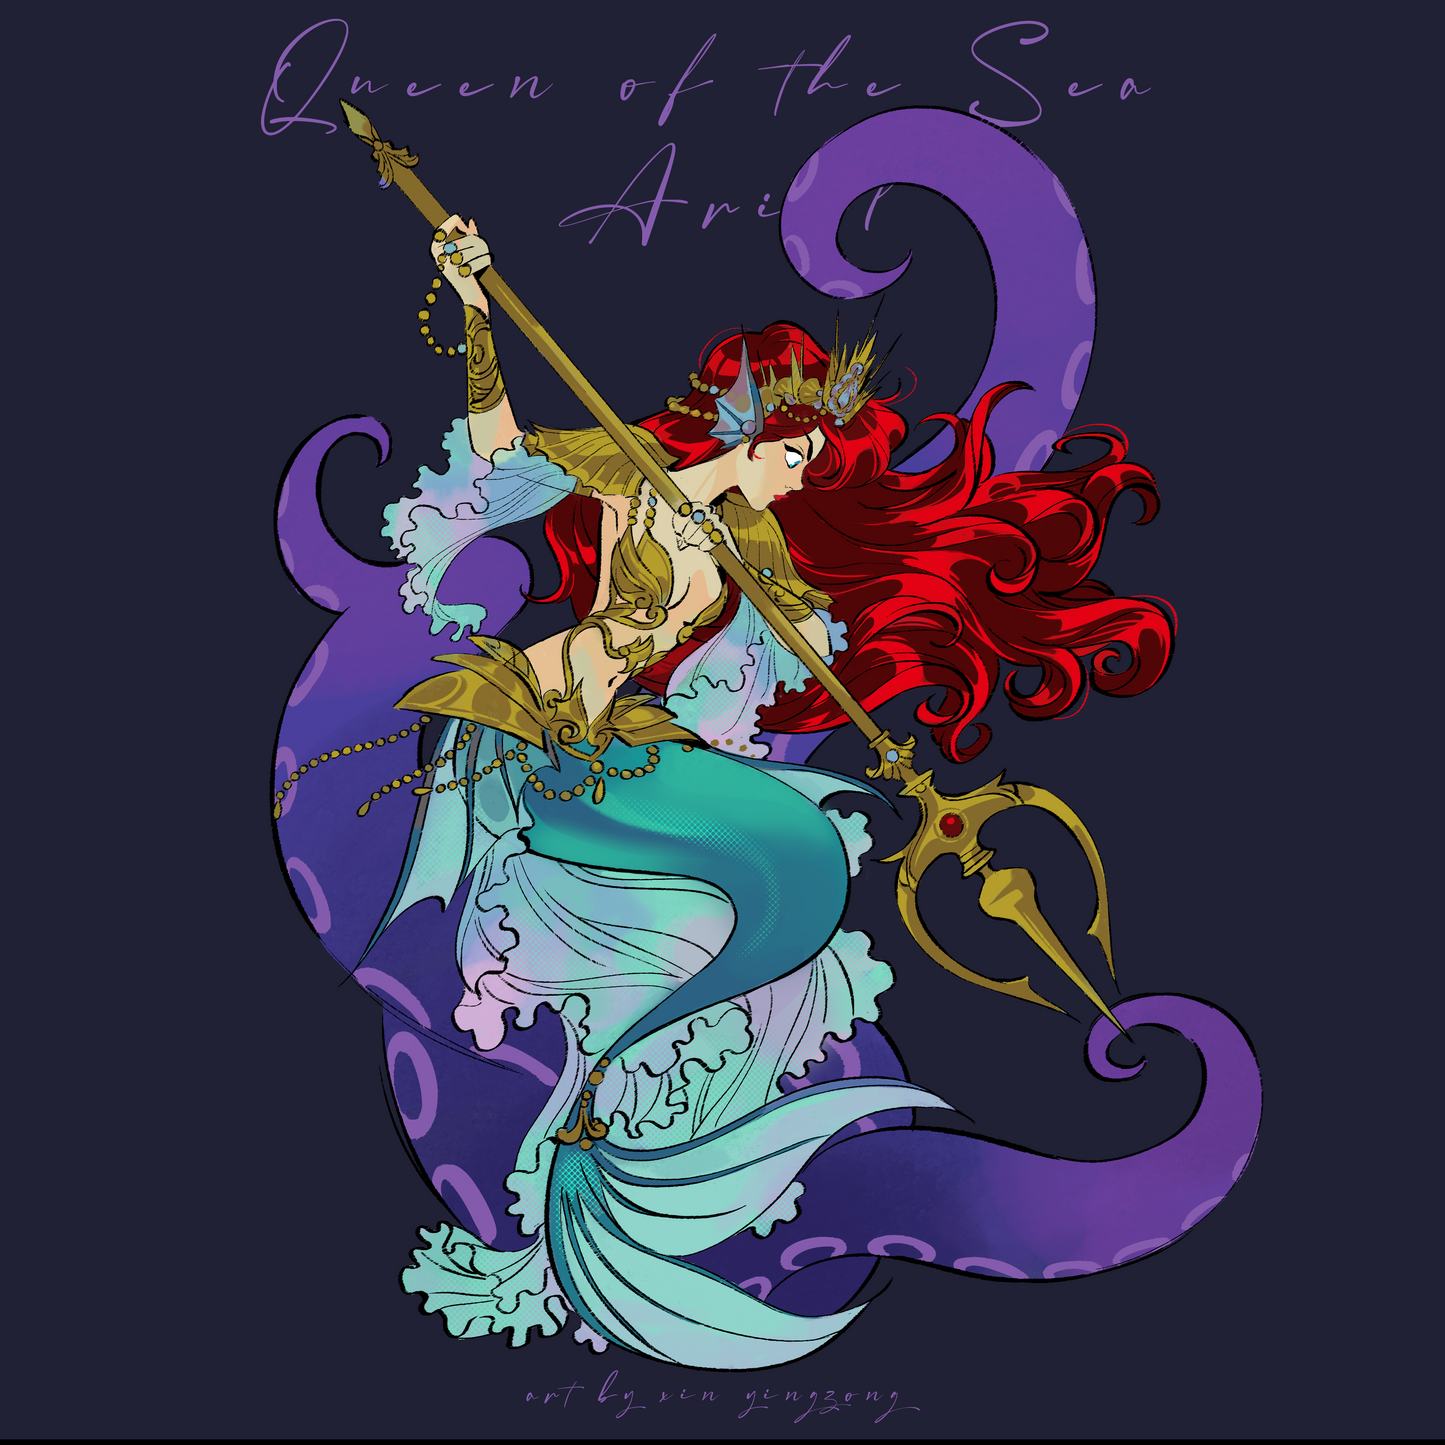 *PRE-SALE* Girl with Sword "Ariel the Queen of the Sea" enamel pin 2 variants